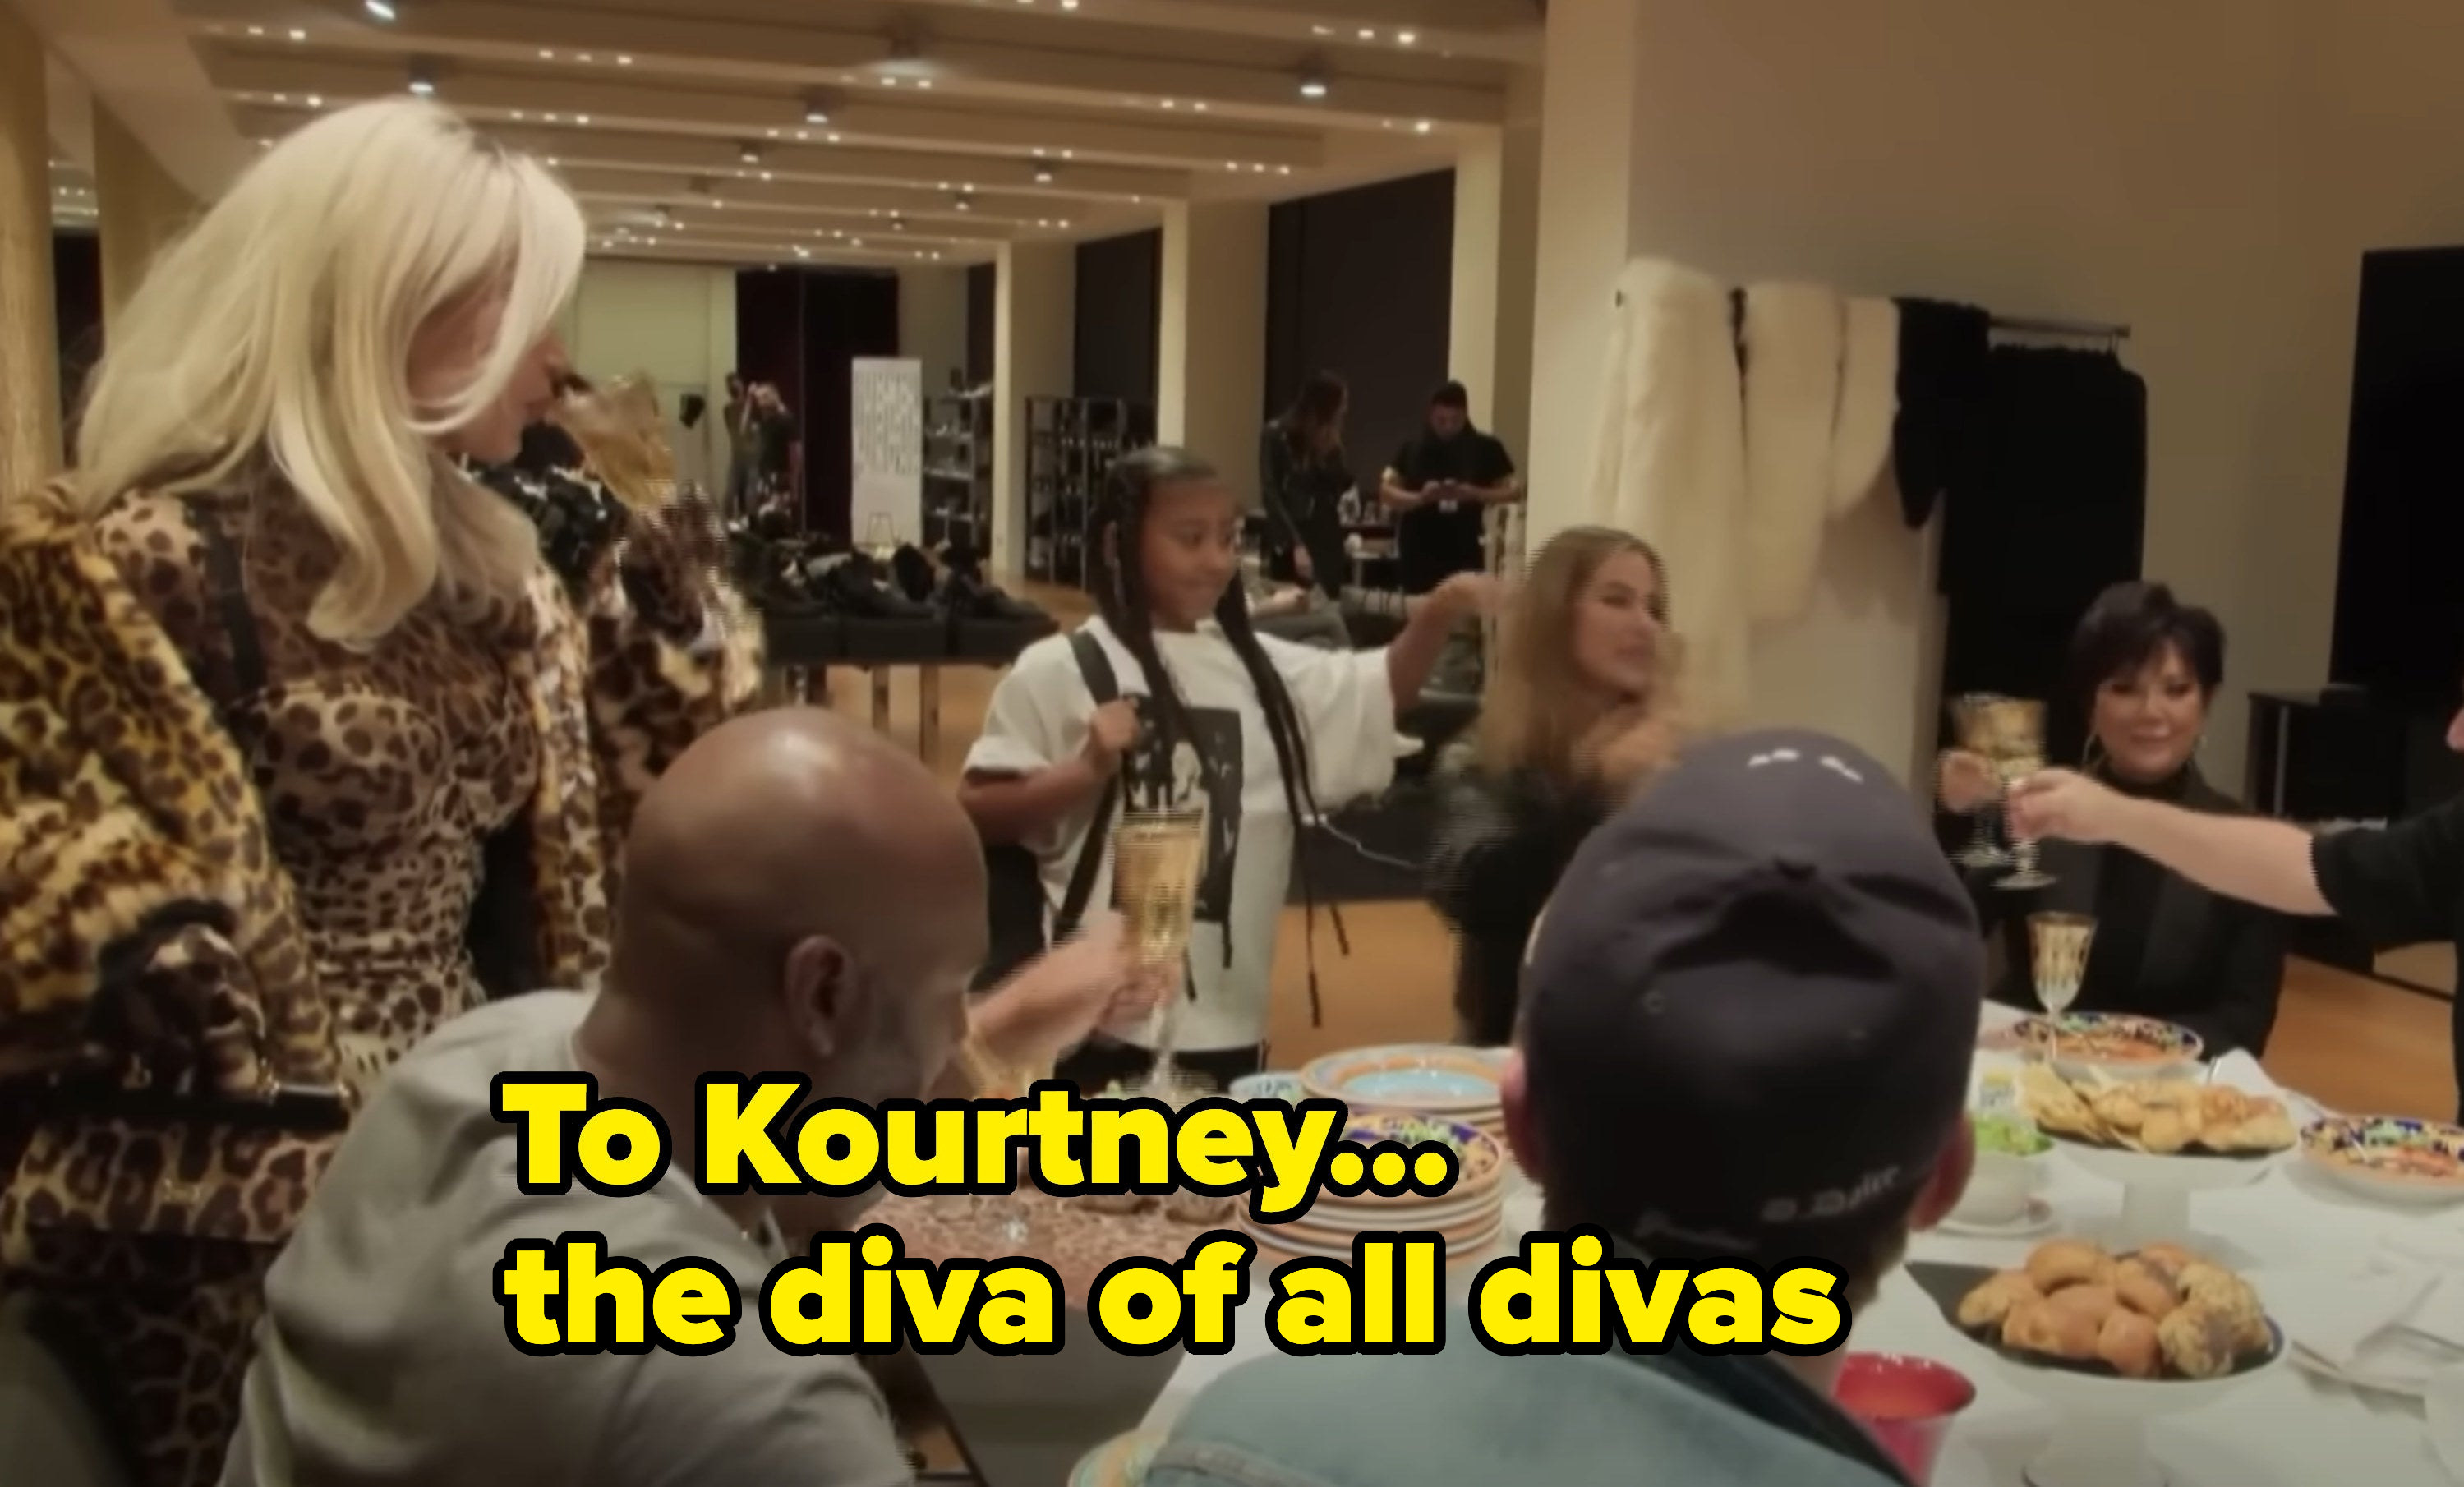 &quot;To Kourtney... the diva of all divas&quot;